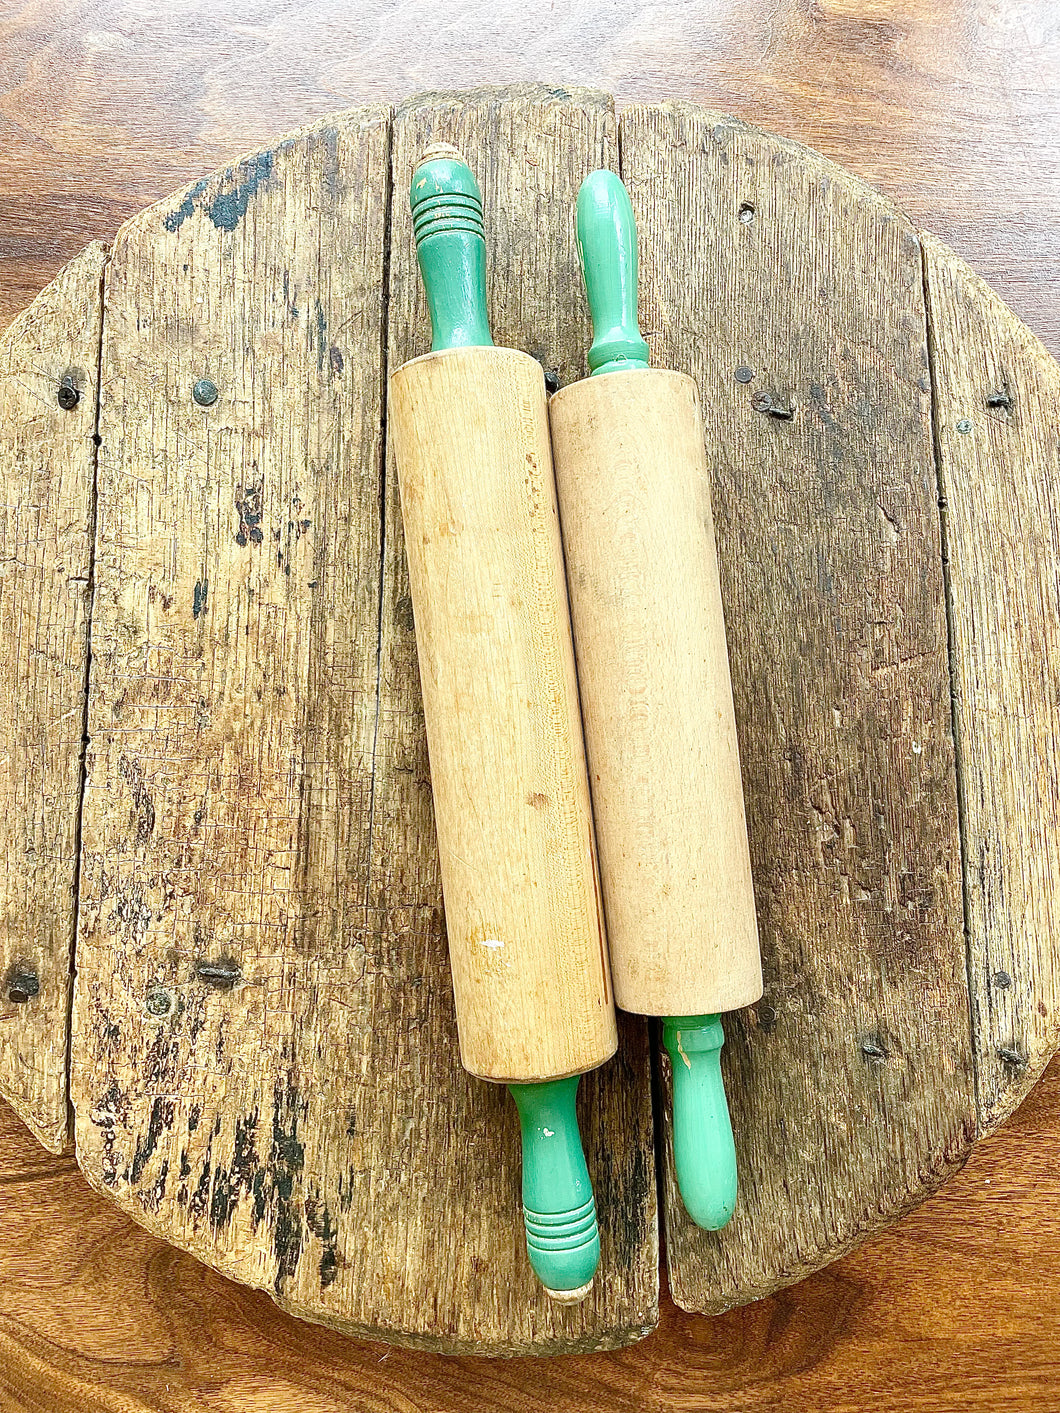 green rolling pins